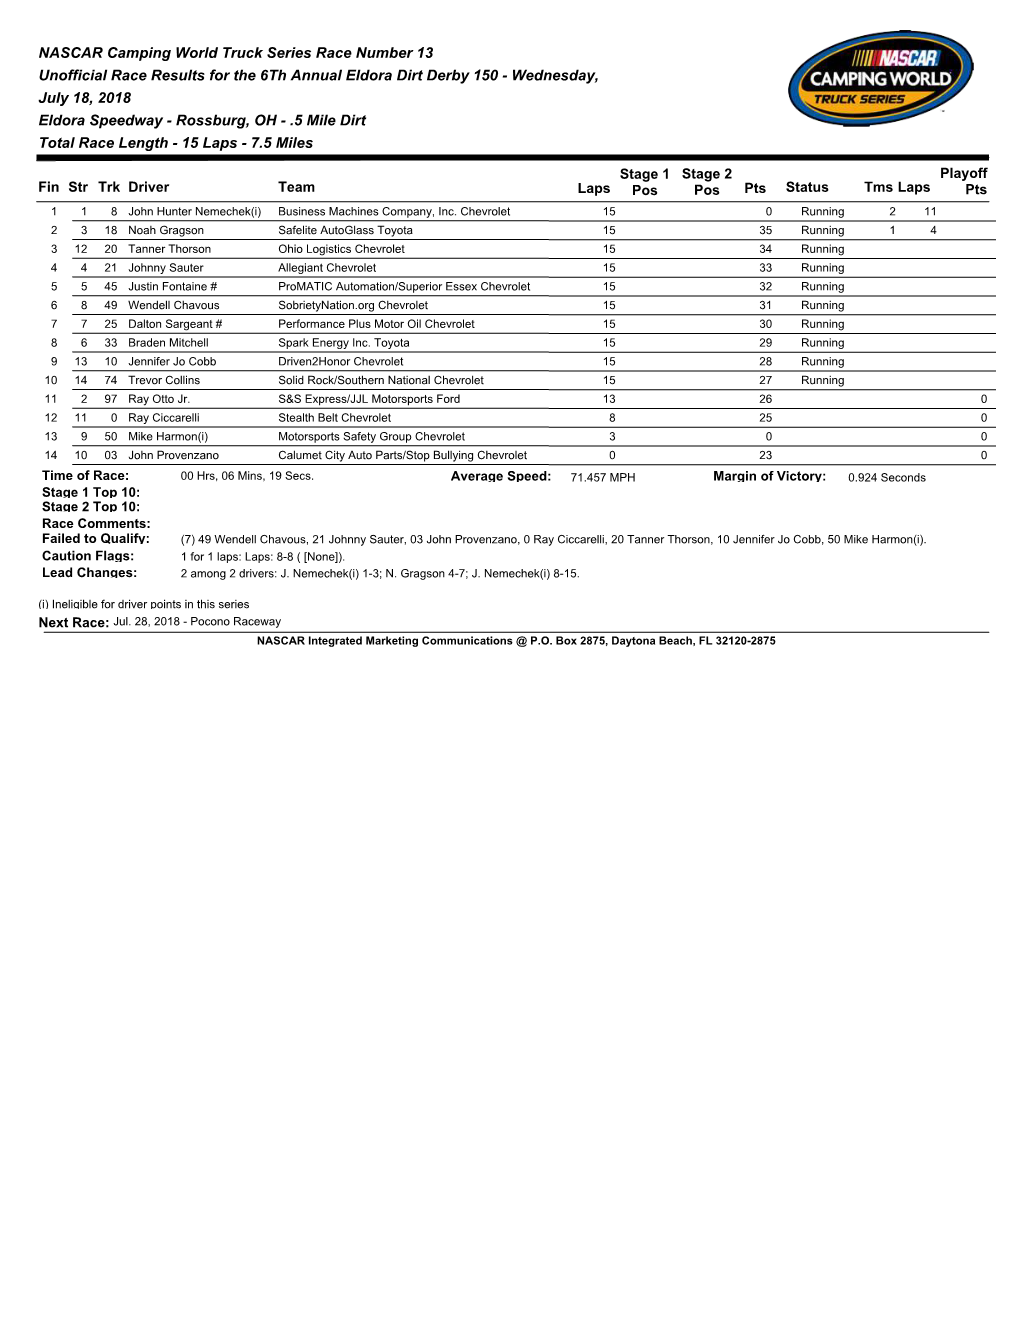 NASCAR Camping World Truck Series Race Number 13 Unofficial Race Results for the 6Th Annual Eldora Dirt Derby